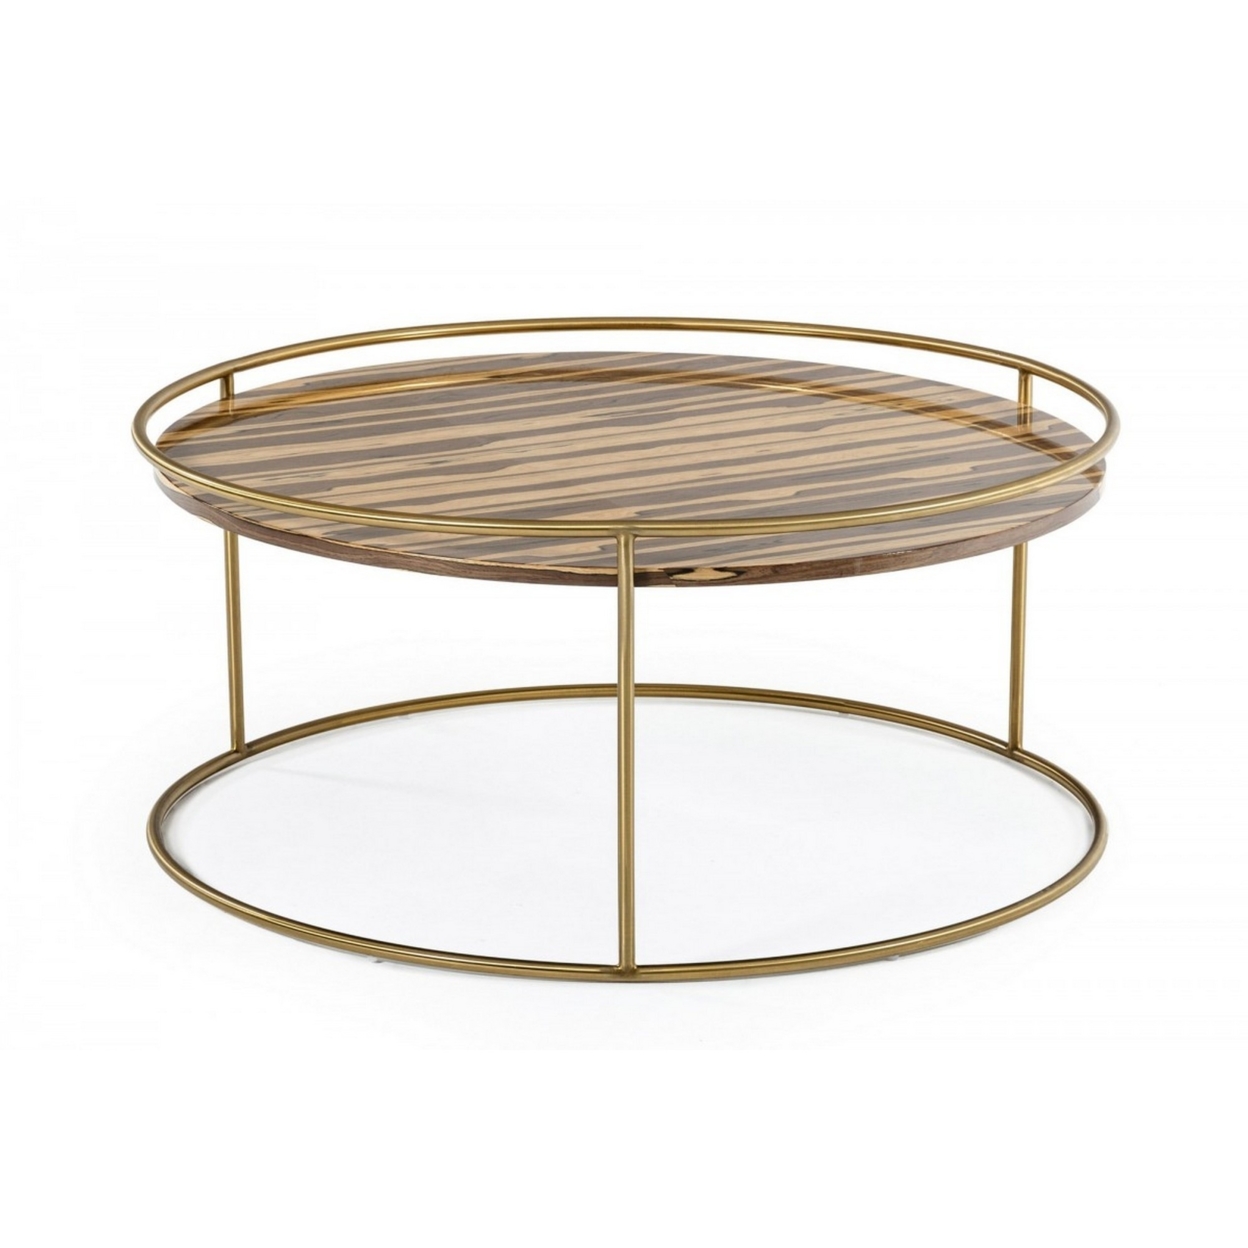 Round Faux Marble Top Coffee Table With Steel Frame, Brown And Gold- Saltoro Sherpi